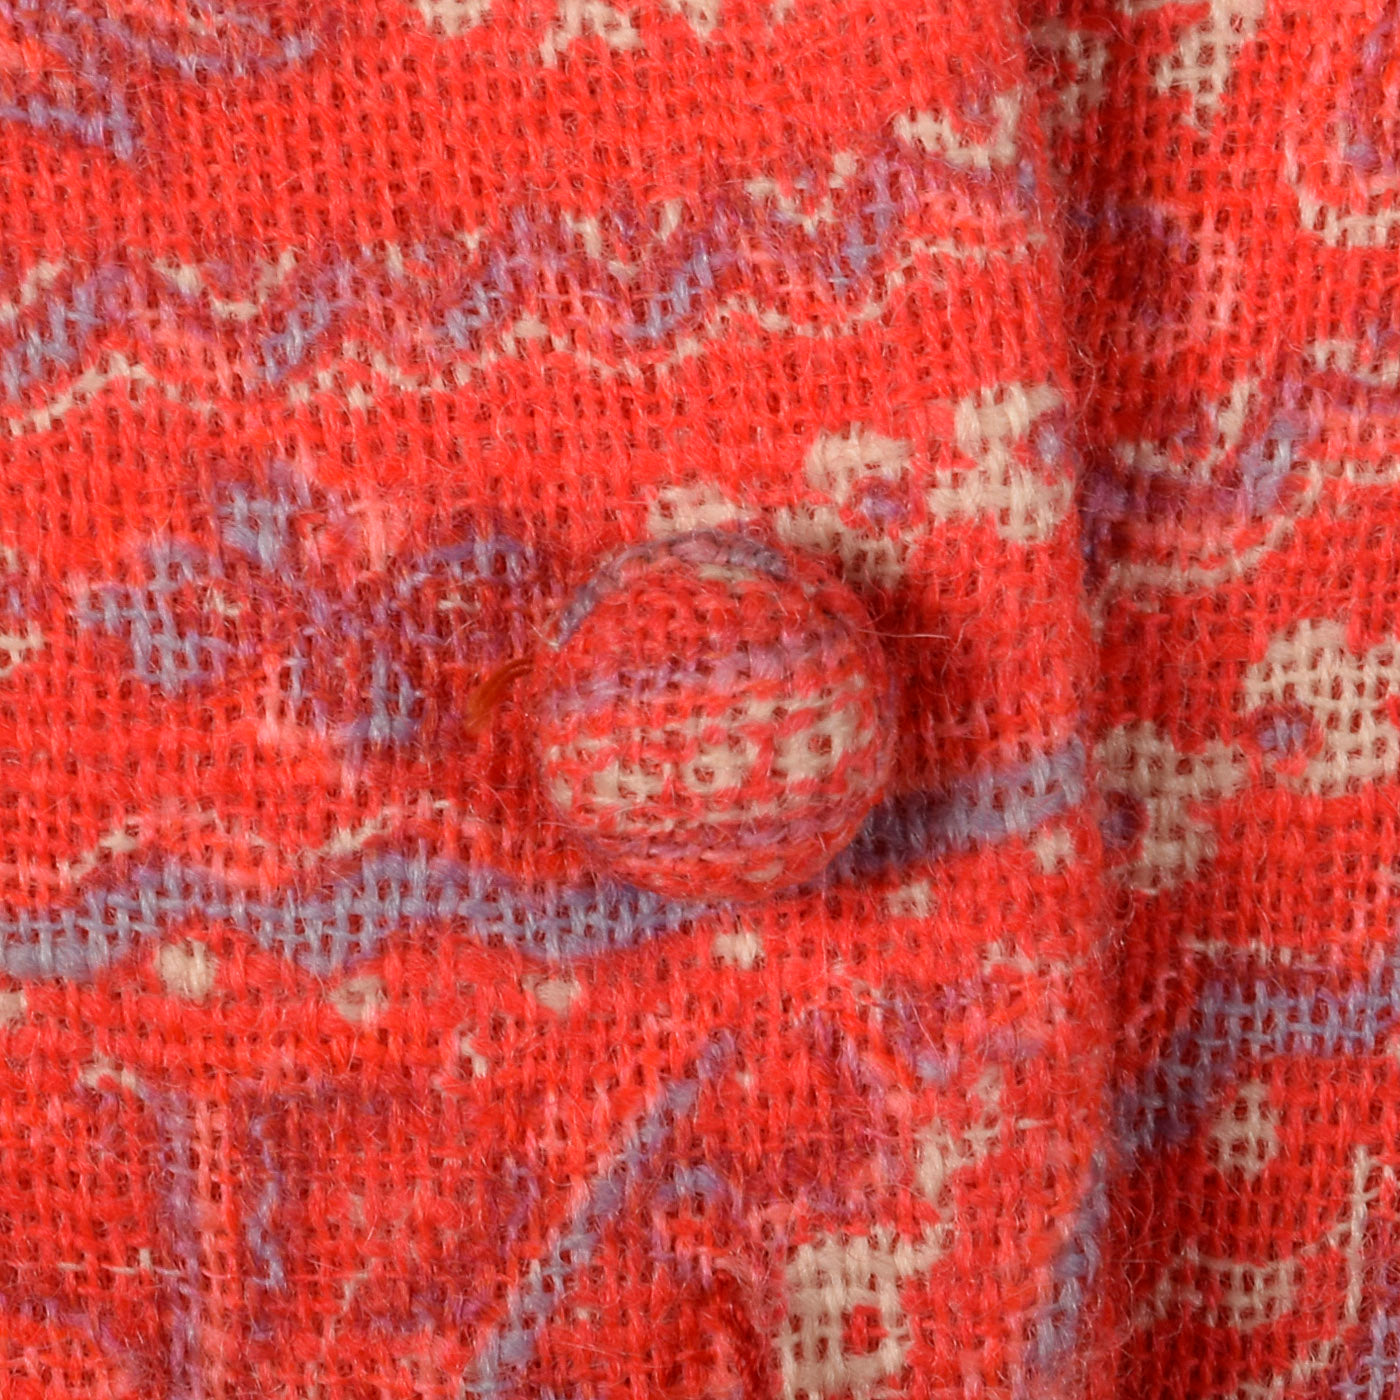 Unbranded 60s Pink and Red Psychedelic Tweed Dress